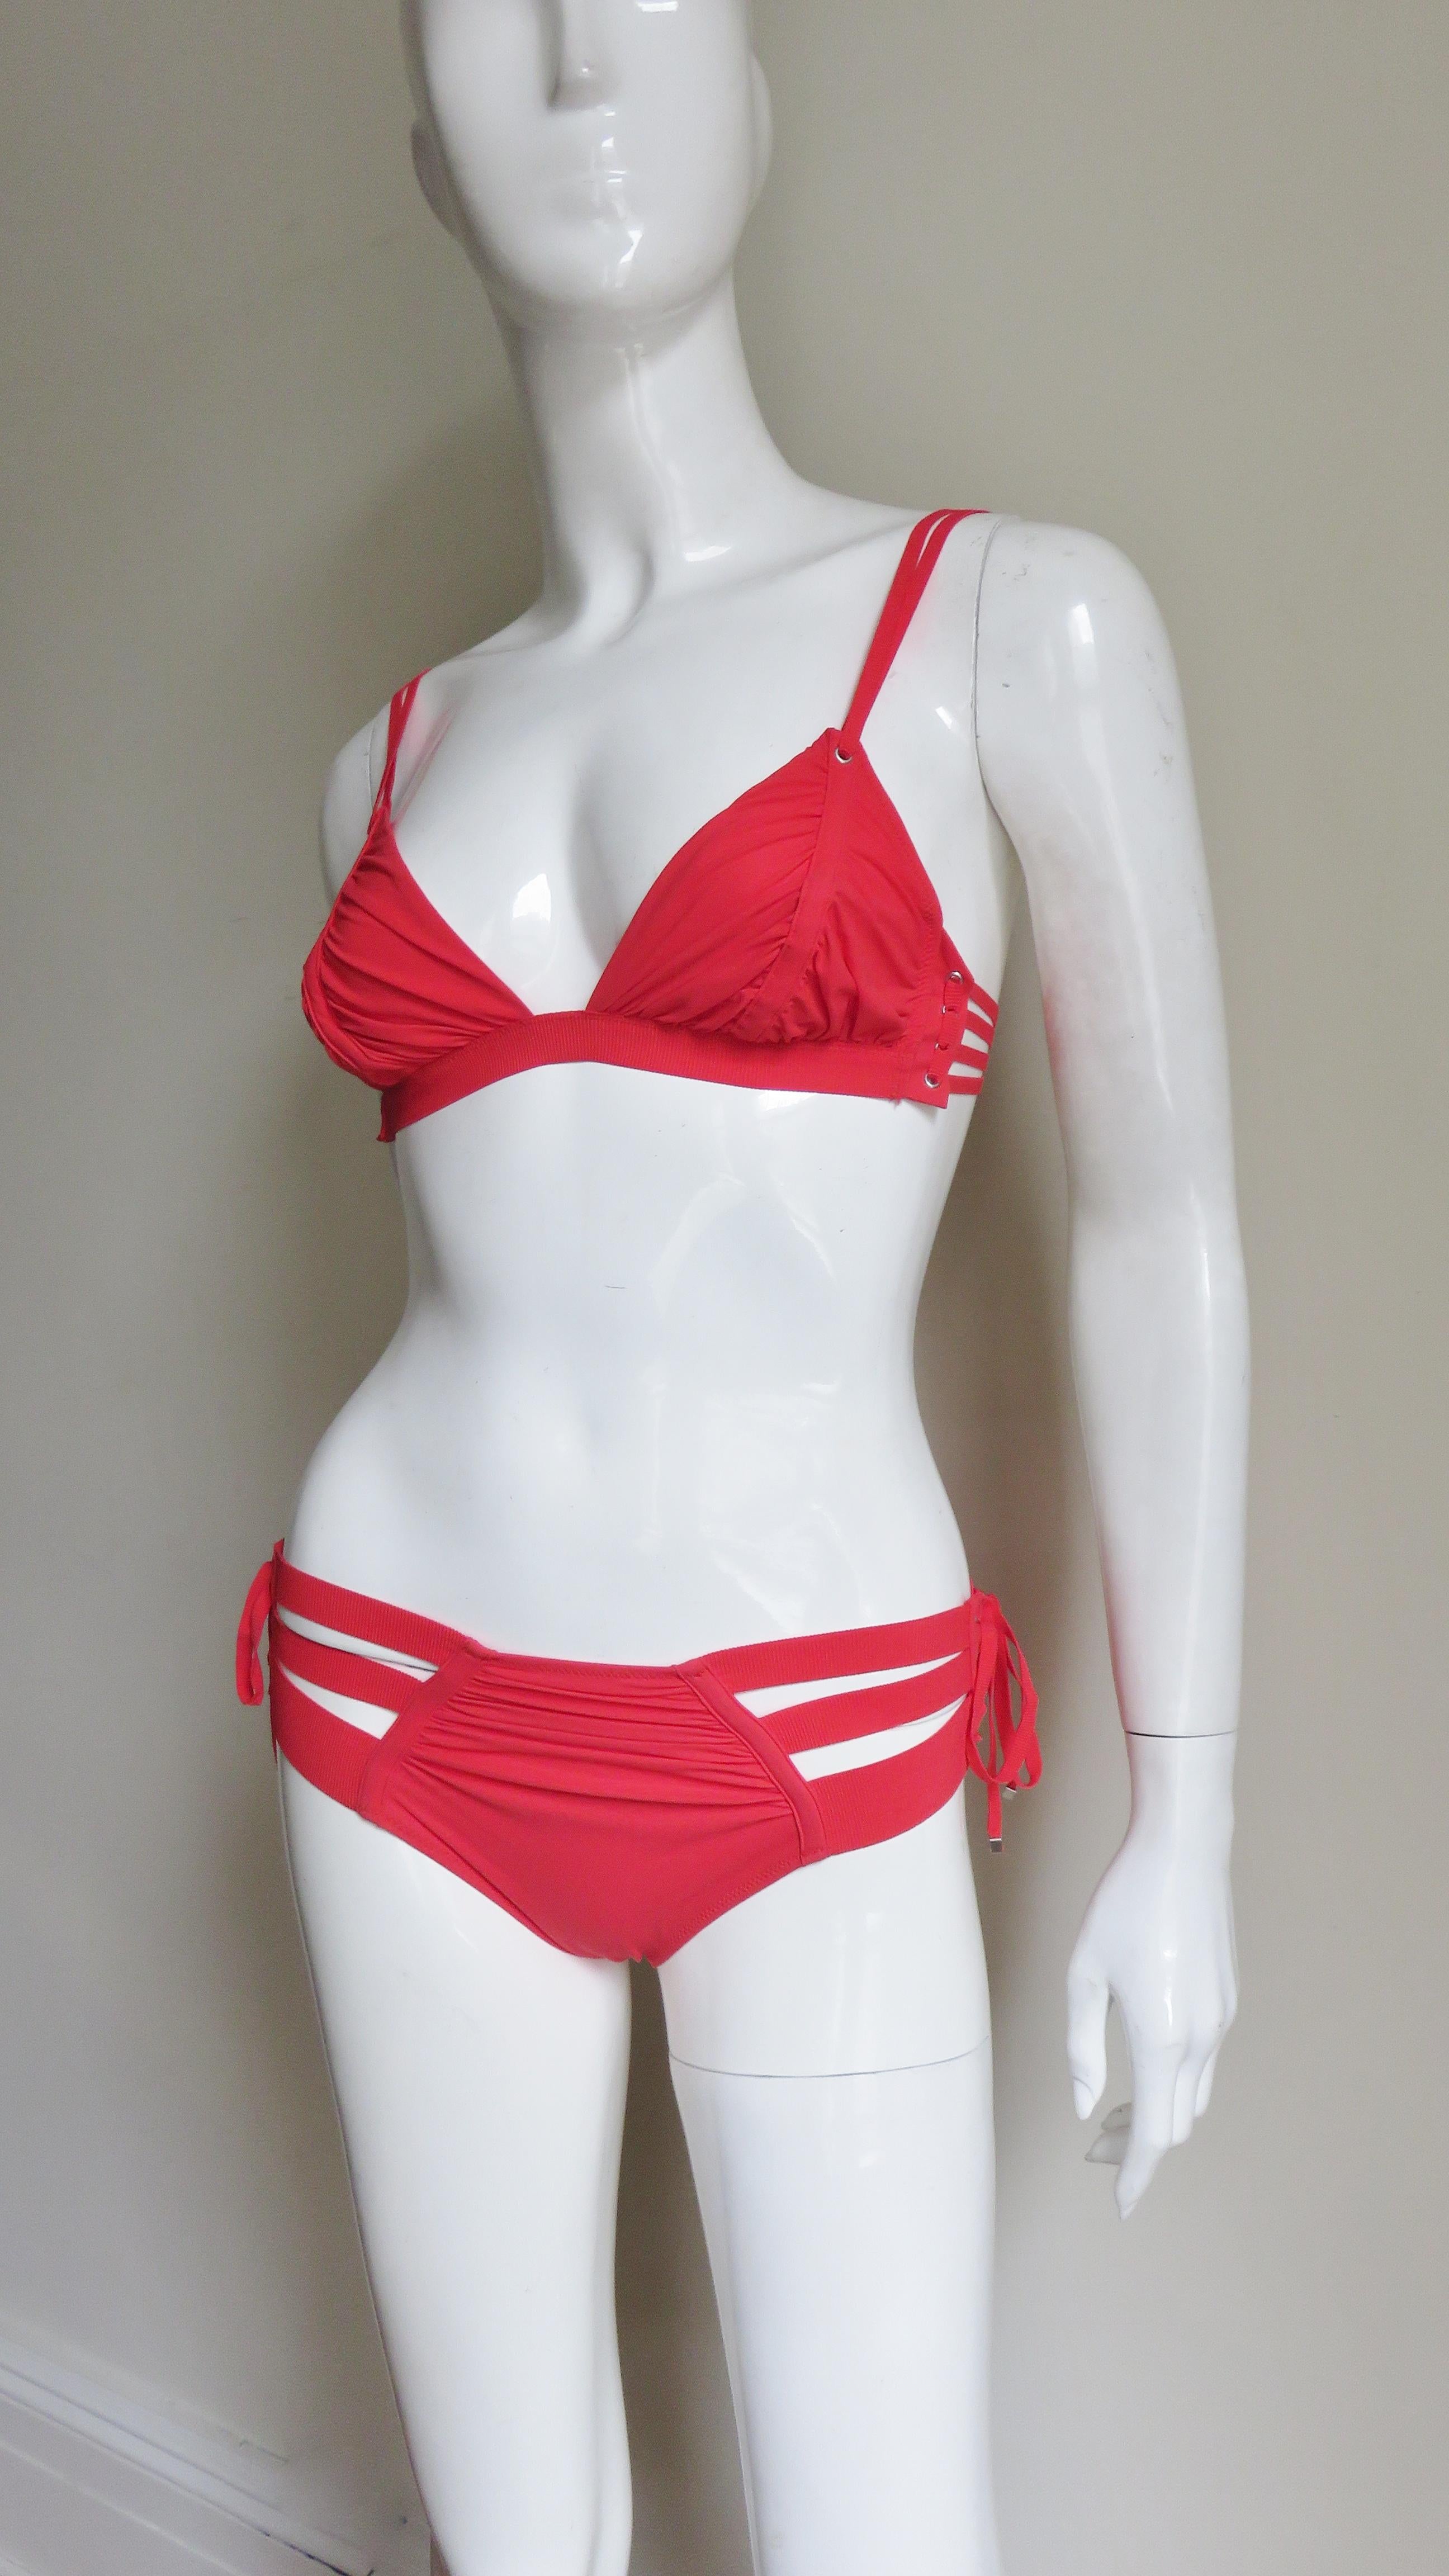 A fabulous red 2 piece bikini swimsuit from Jean Paul Gaultier for La Perla.  The top has double shoulder straps, 3 side straps and closes with a matching back clasp.  The bottoms have center front and back ruching with three stretch bands on the